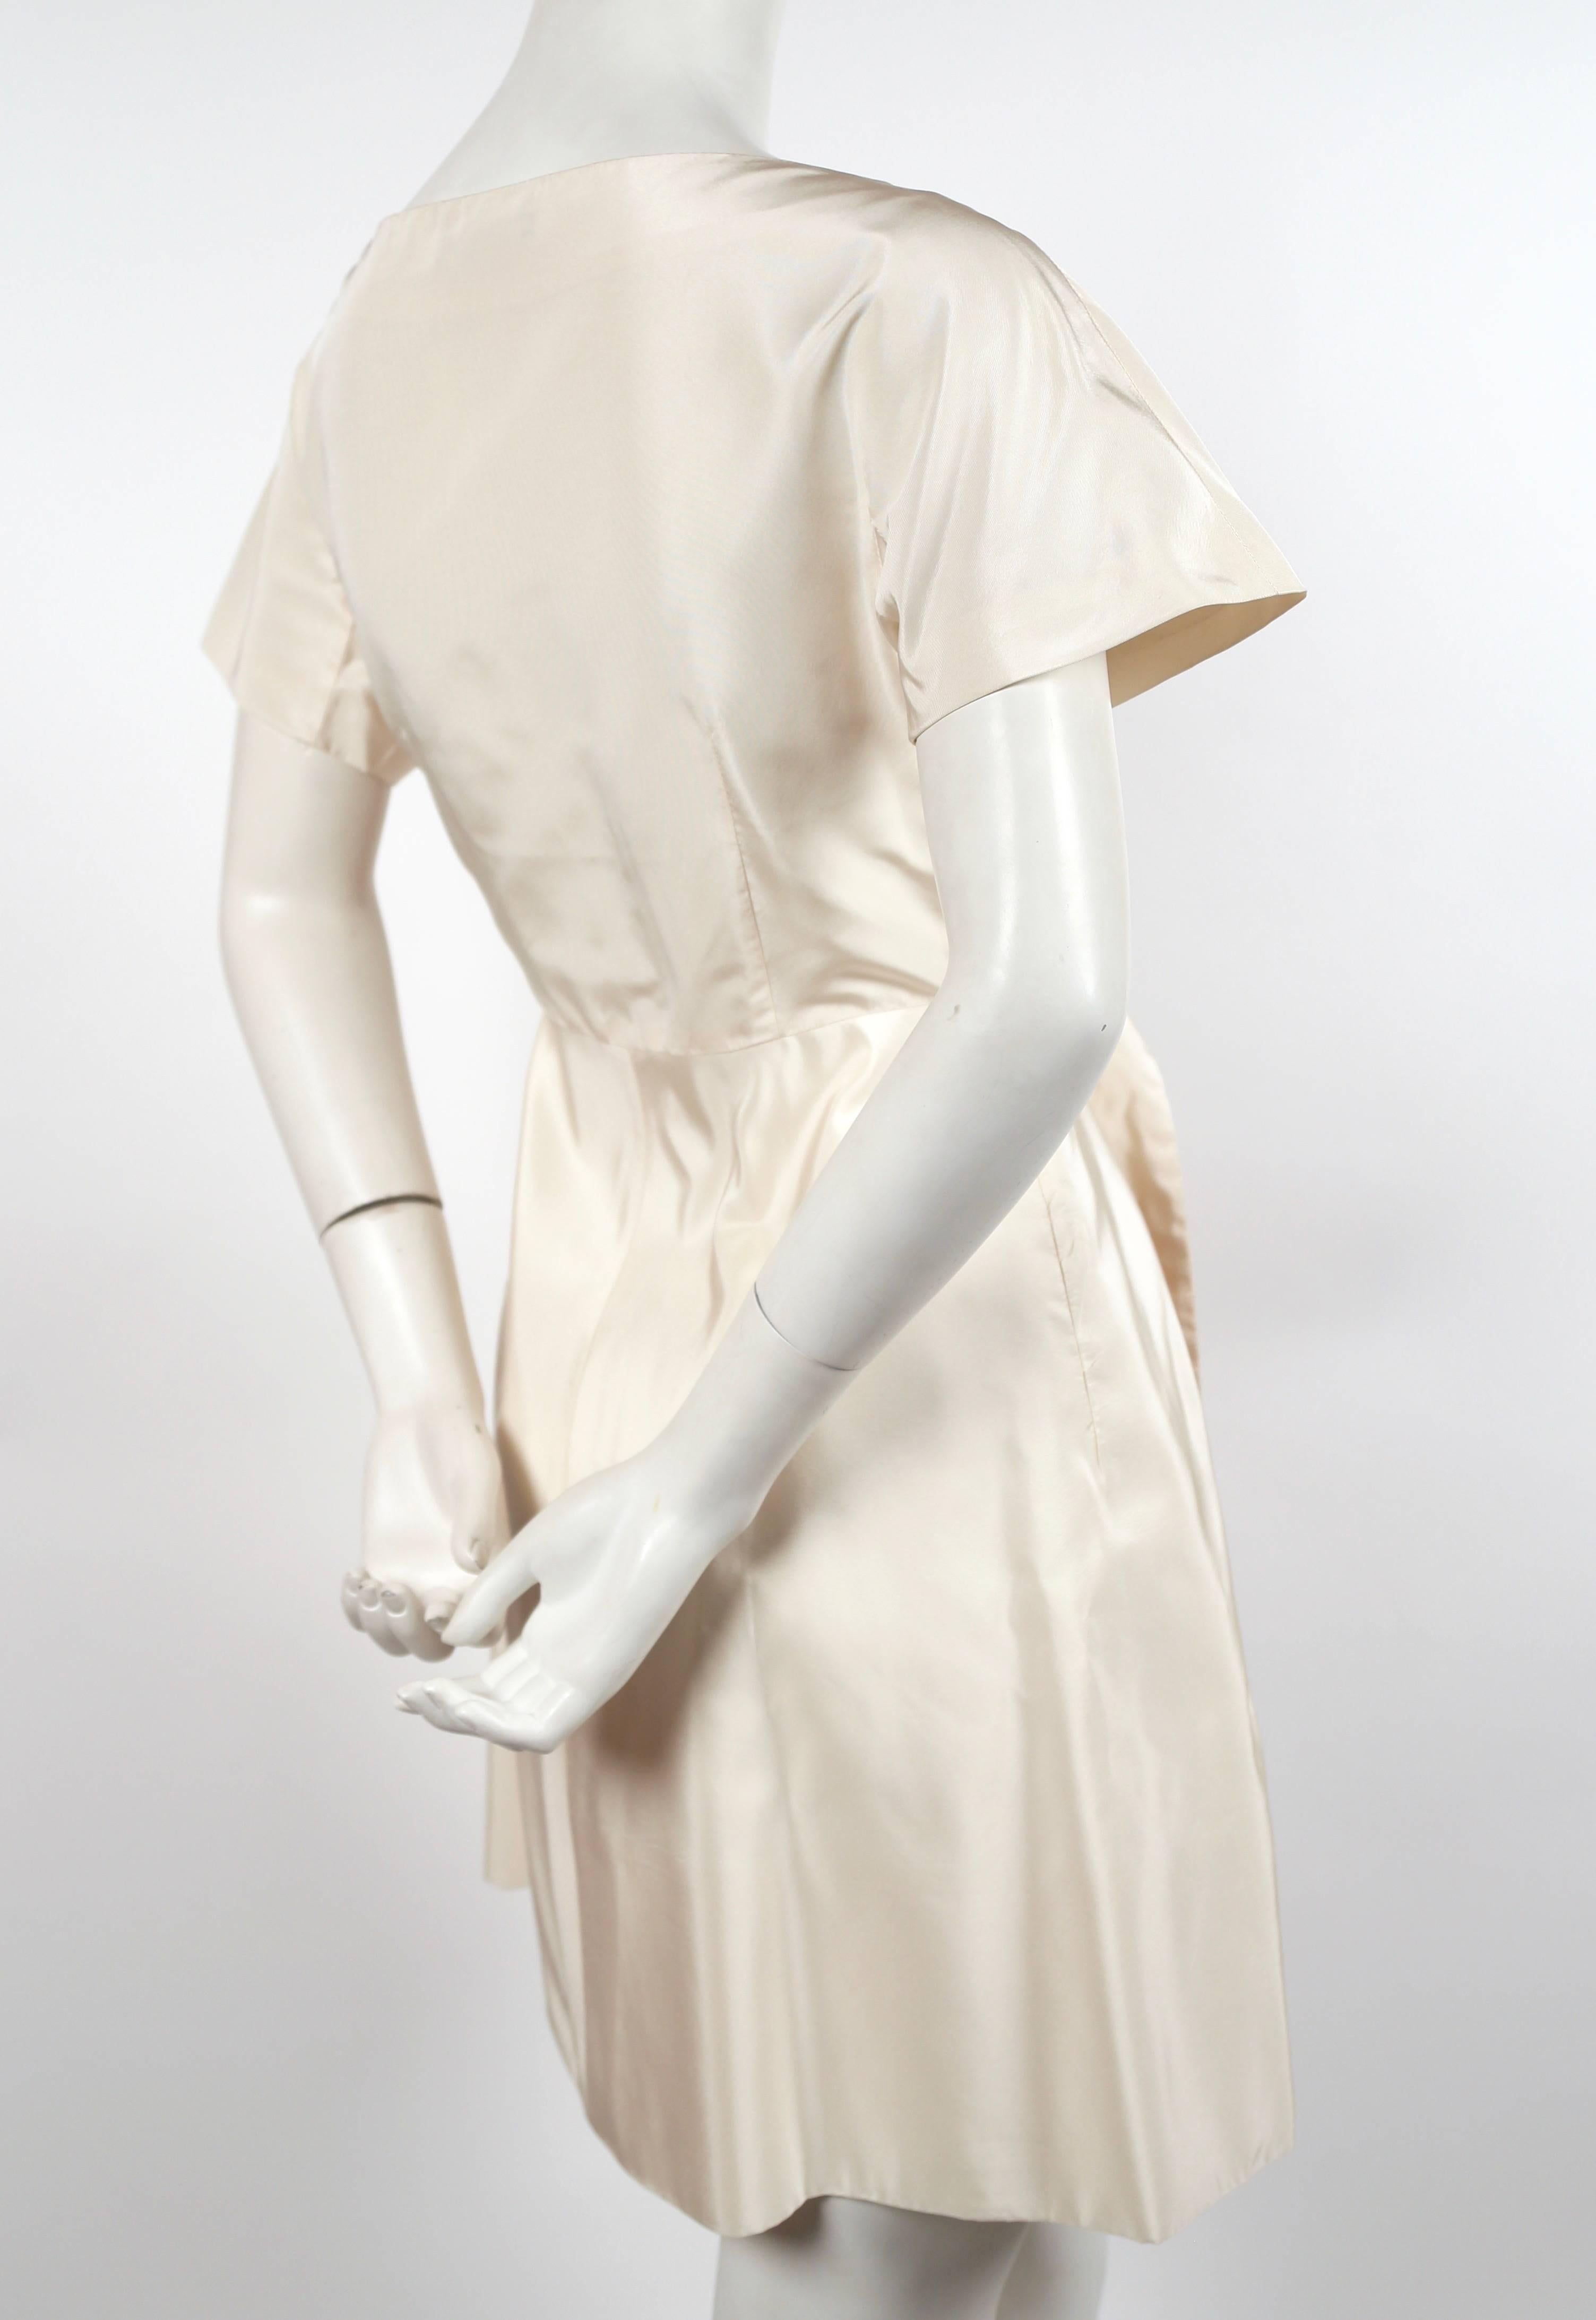 Cream silk dress with bow detail designed by Alexander McQueen dating to spring 2006 as seen on the runway. Italian size 42. Approximate measurements: bust 34